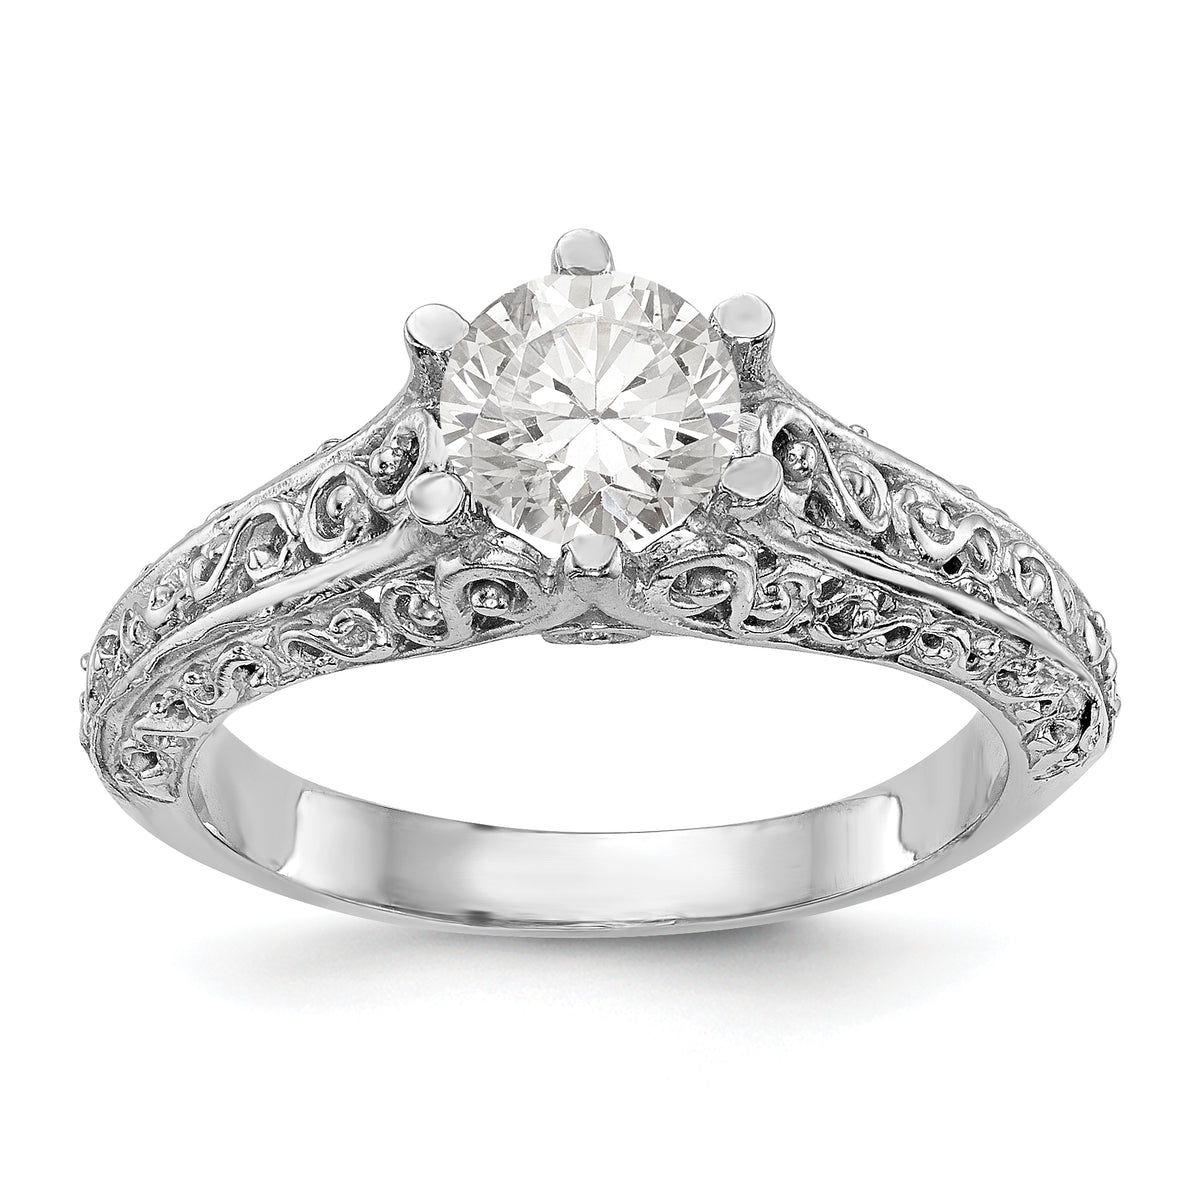 14K White Gold 1.25 carat (7.00 mm) 6-Prong Vintage Round Solitaire Engagement Ring Mounting